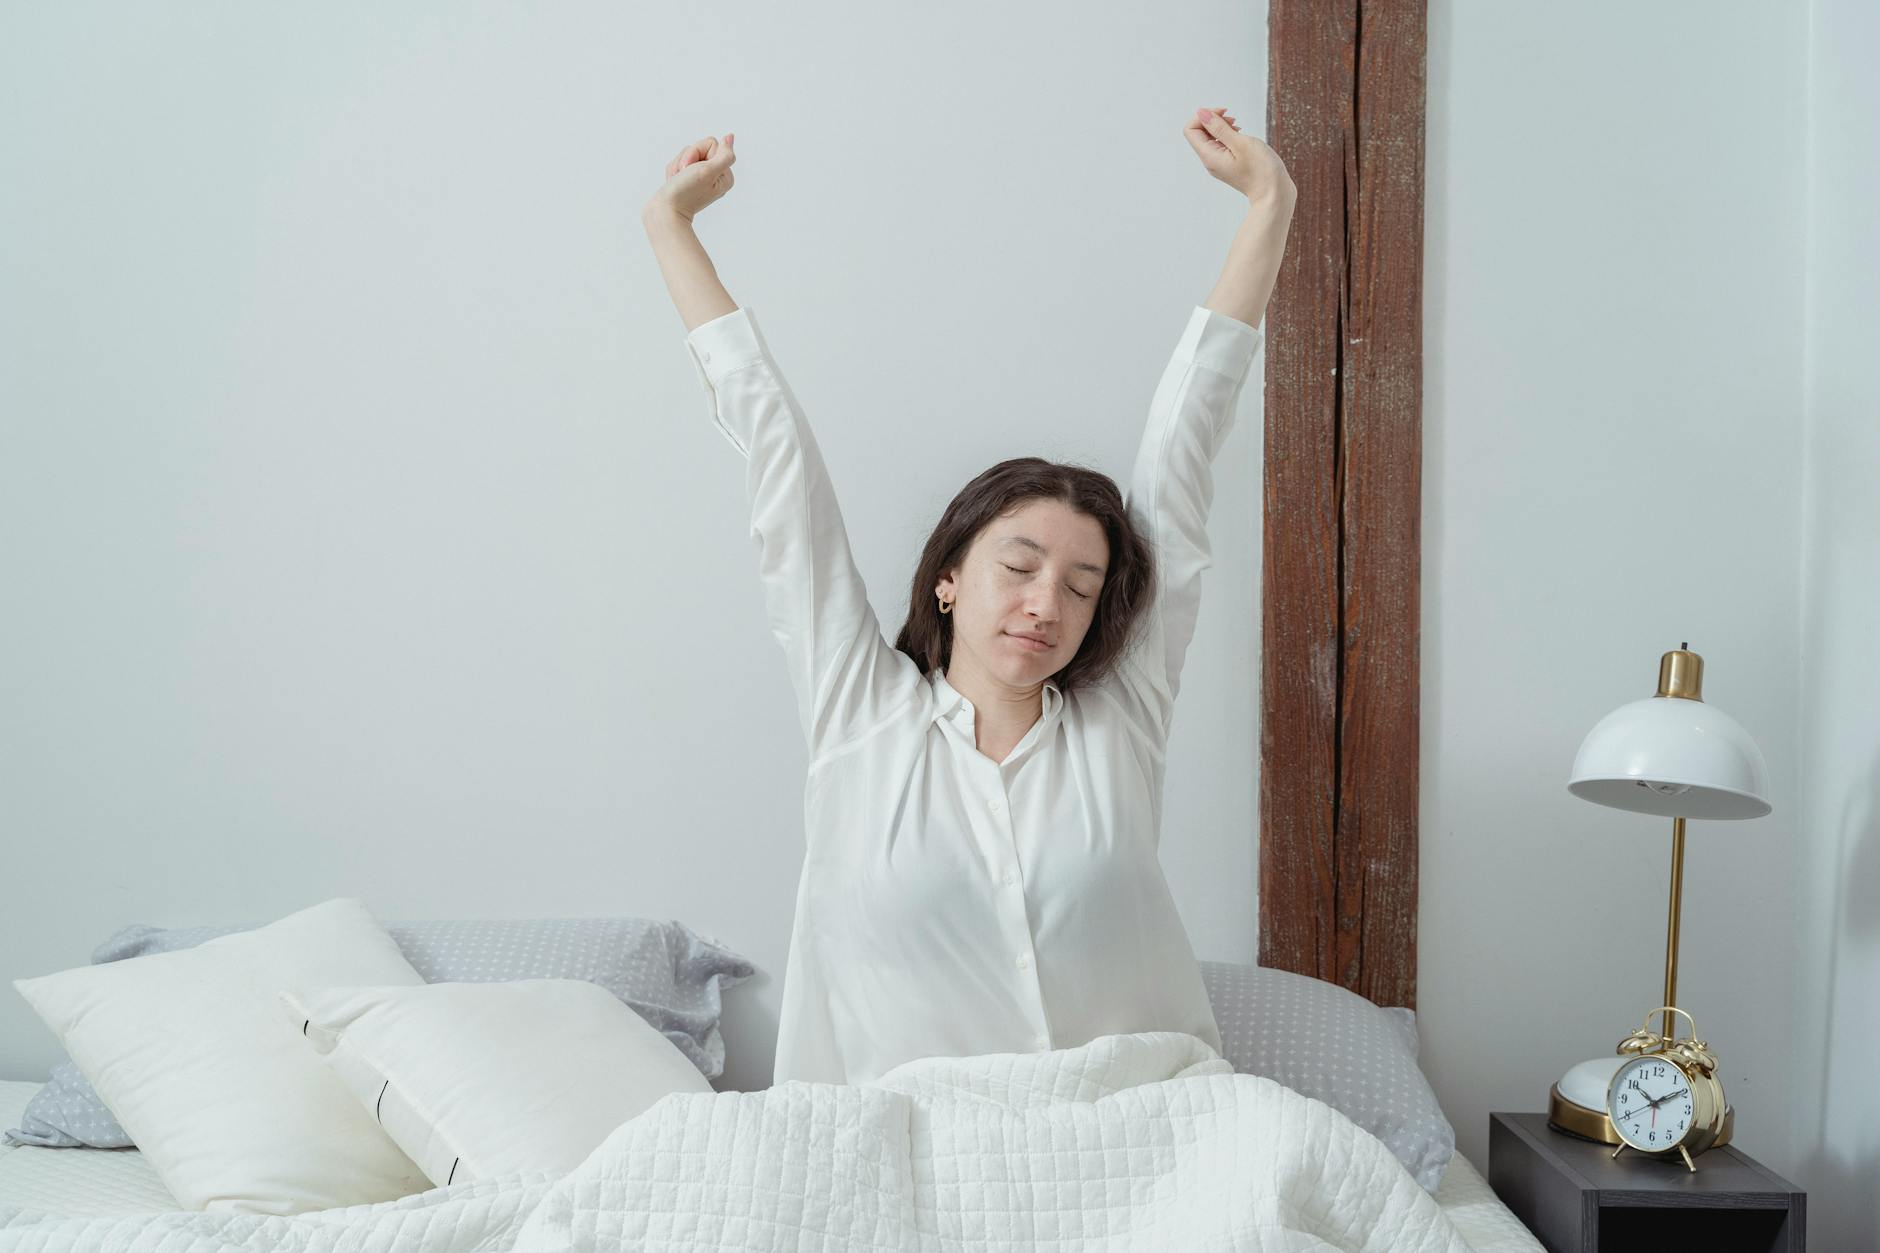 Image of a sleepy woman waking up in the morning